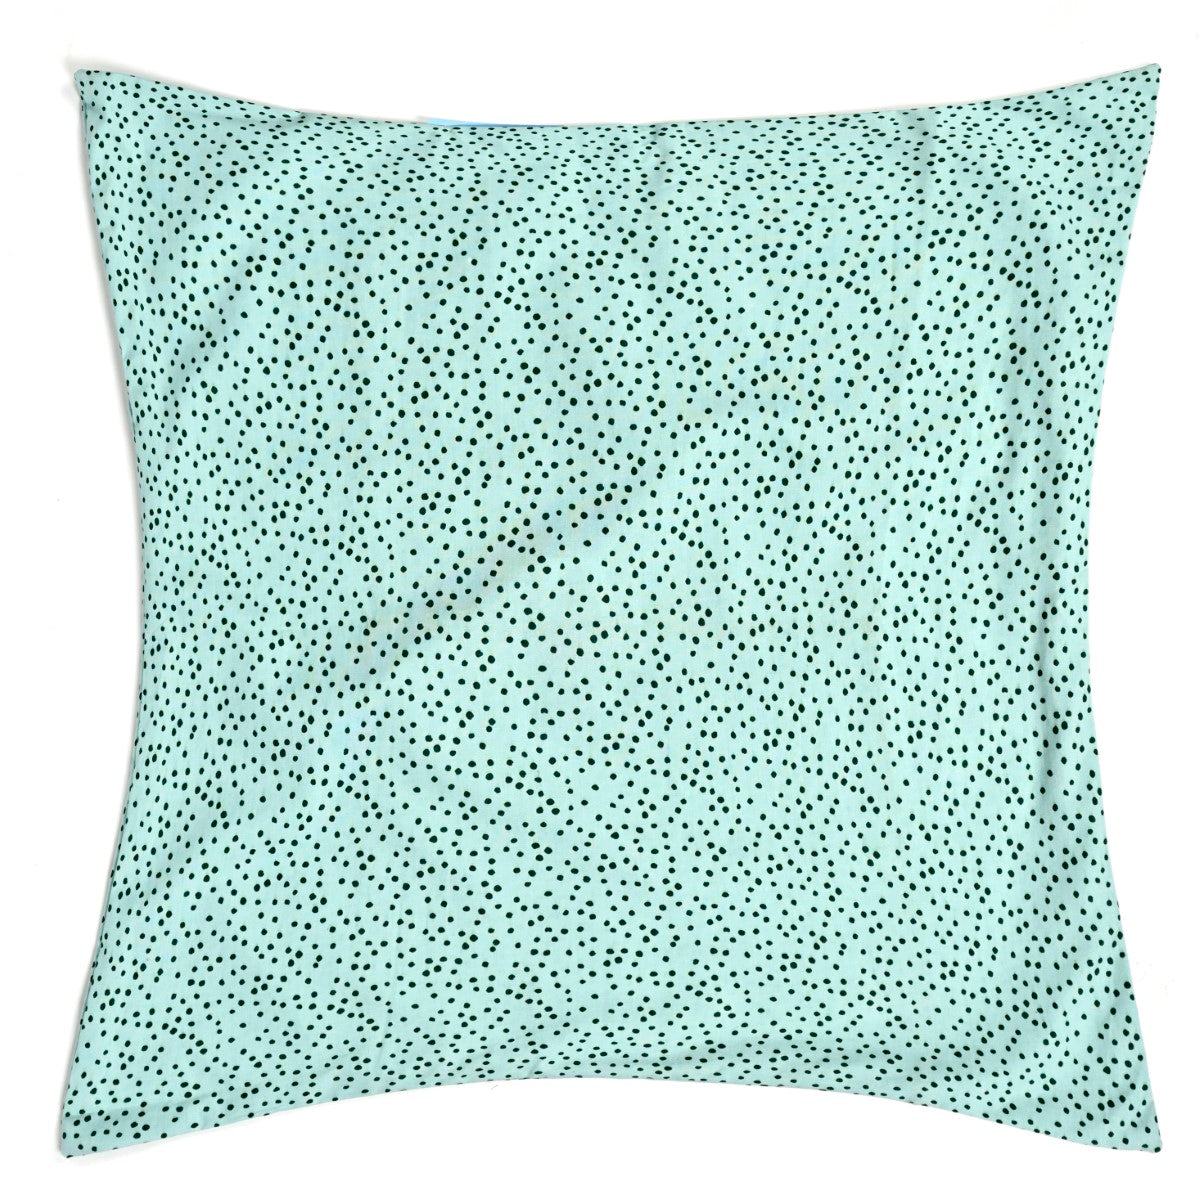 Printed Cushion Cover 18x18 Assorted